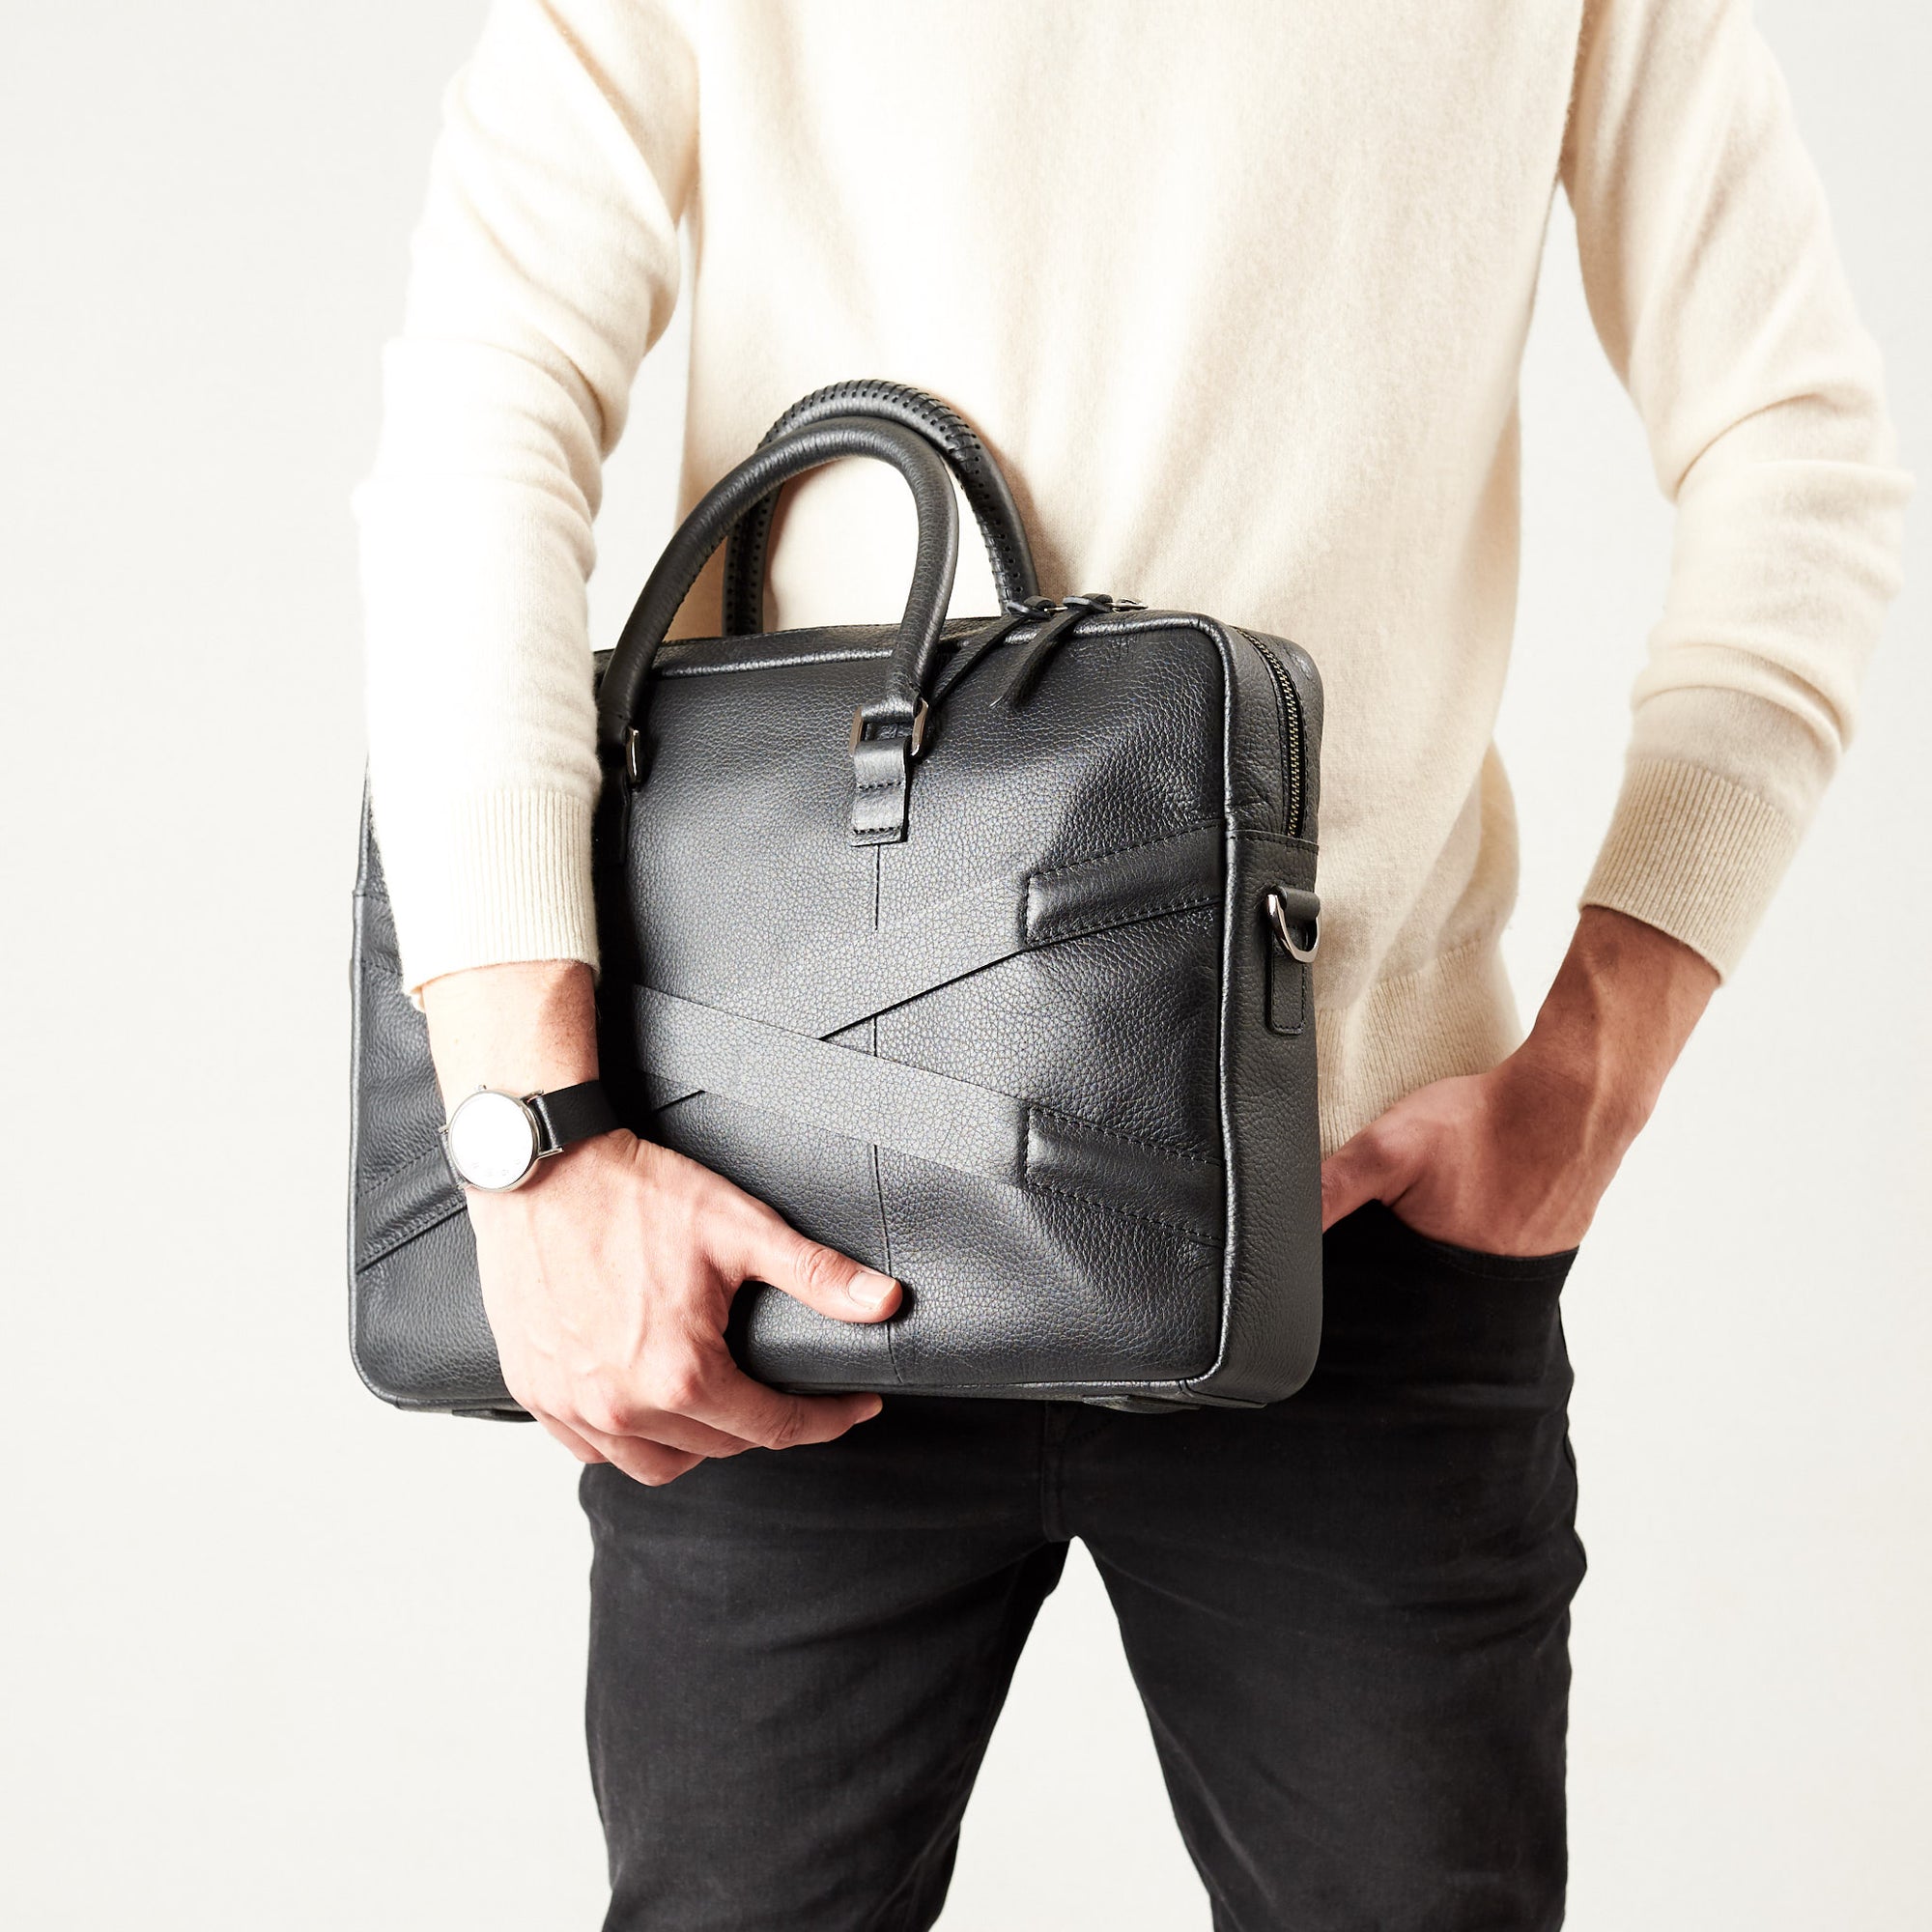 Style model holding crossbody with hands. Black leather briefcase laptop bag for men. Gazeli laptop briefcase by Capra Leather.